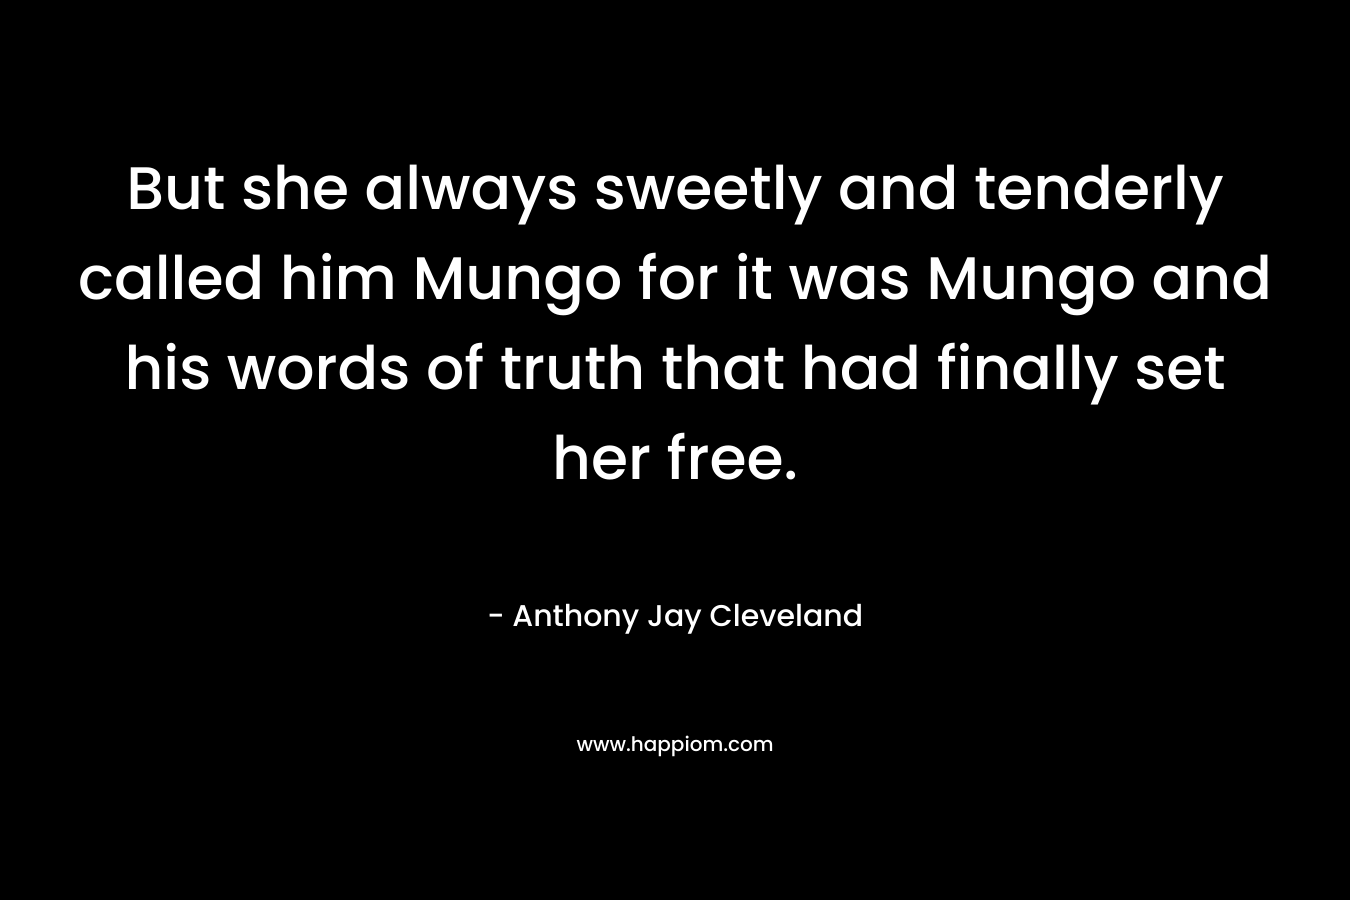 But she always sweetly and tenderly called him Mungo for it was Mungo and his words of truth that had finally set her free.